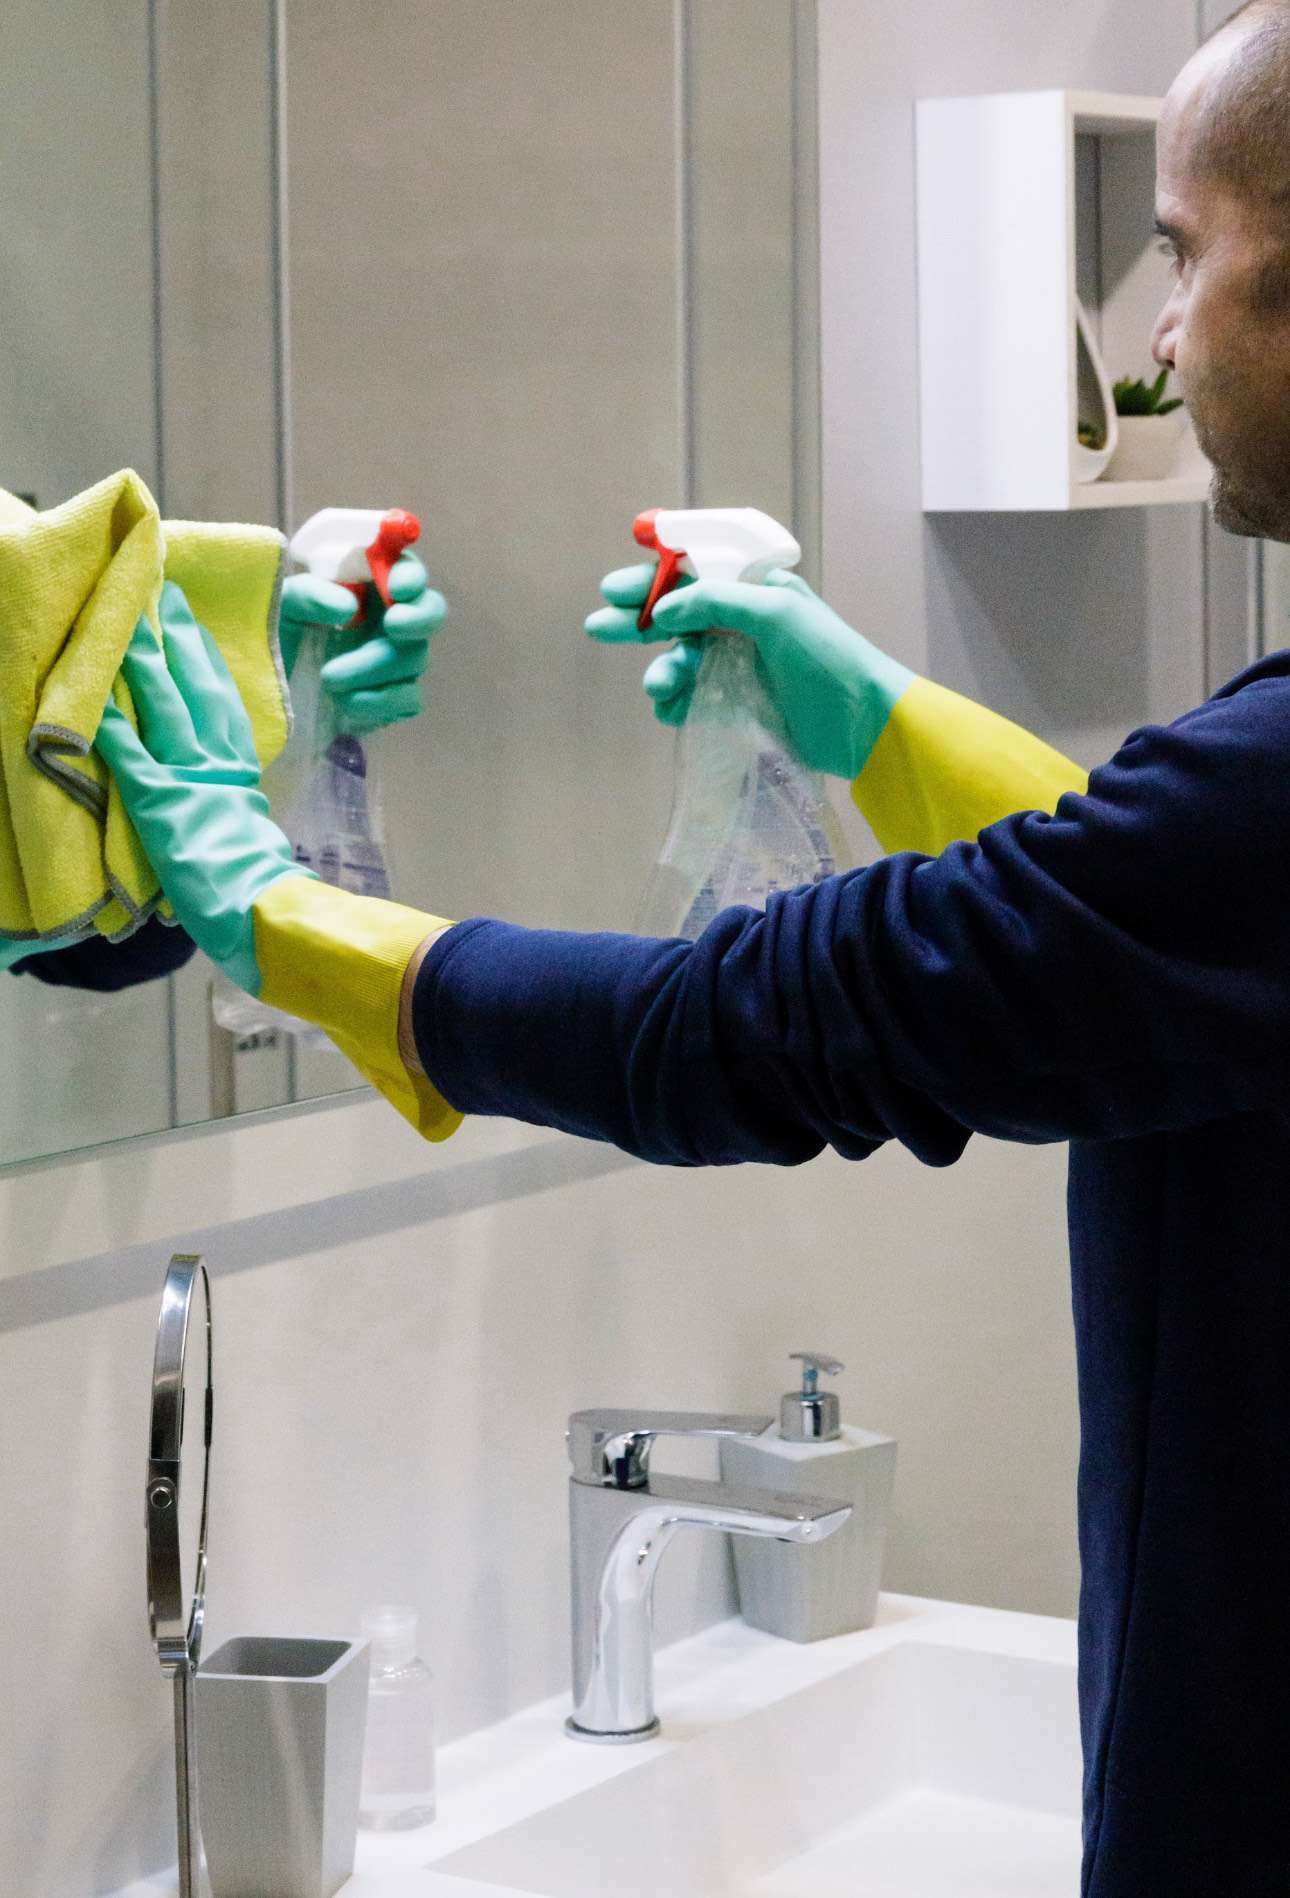 How Often To Clean Bathroom Surfaces, According To Experts